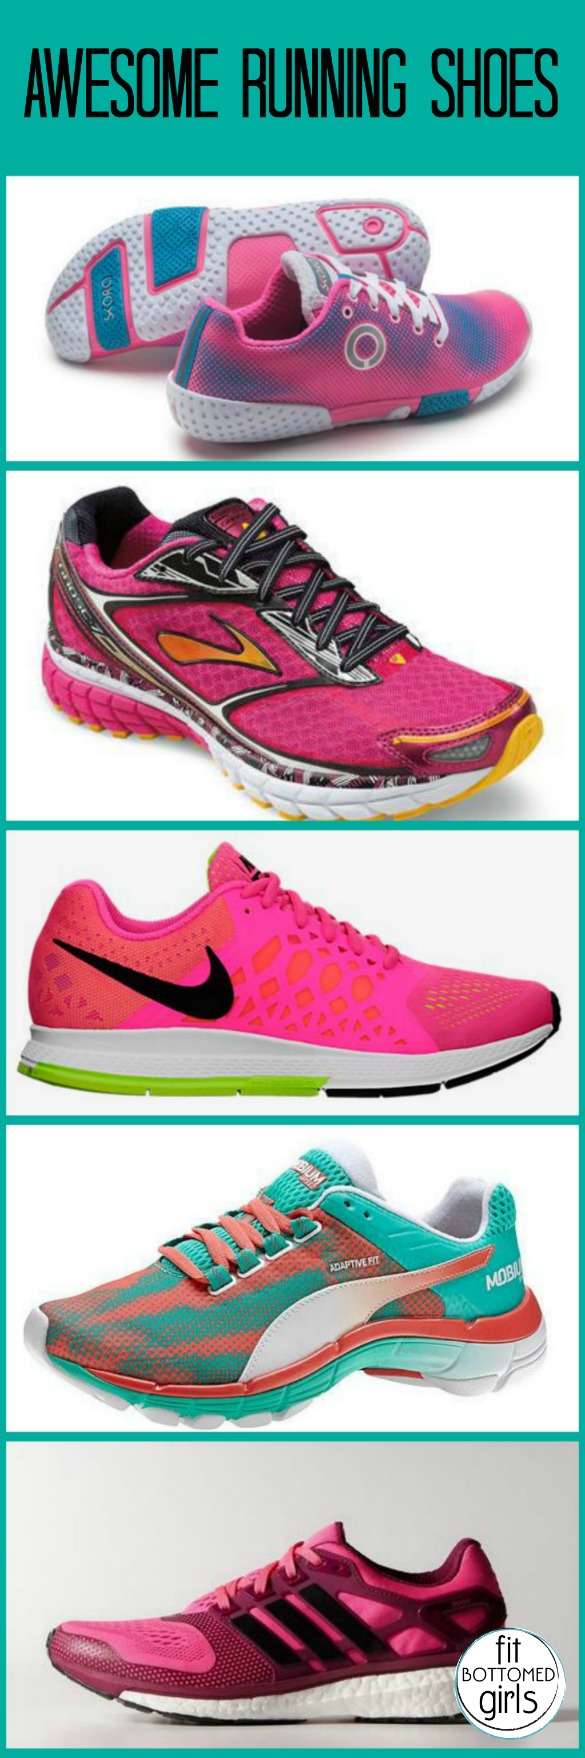 fave-running-shoes-585